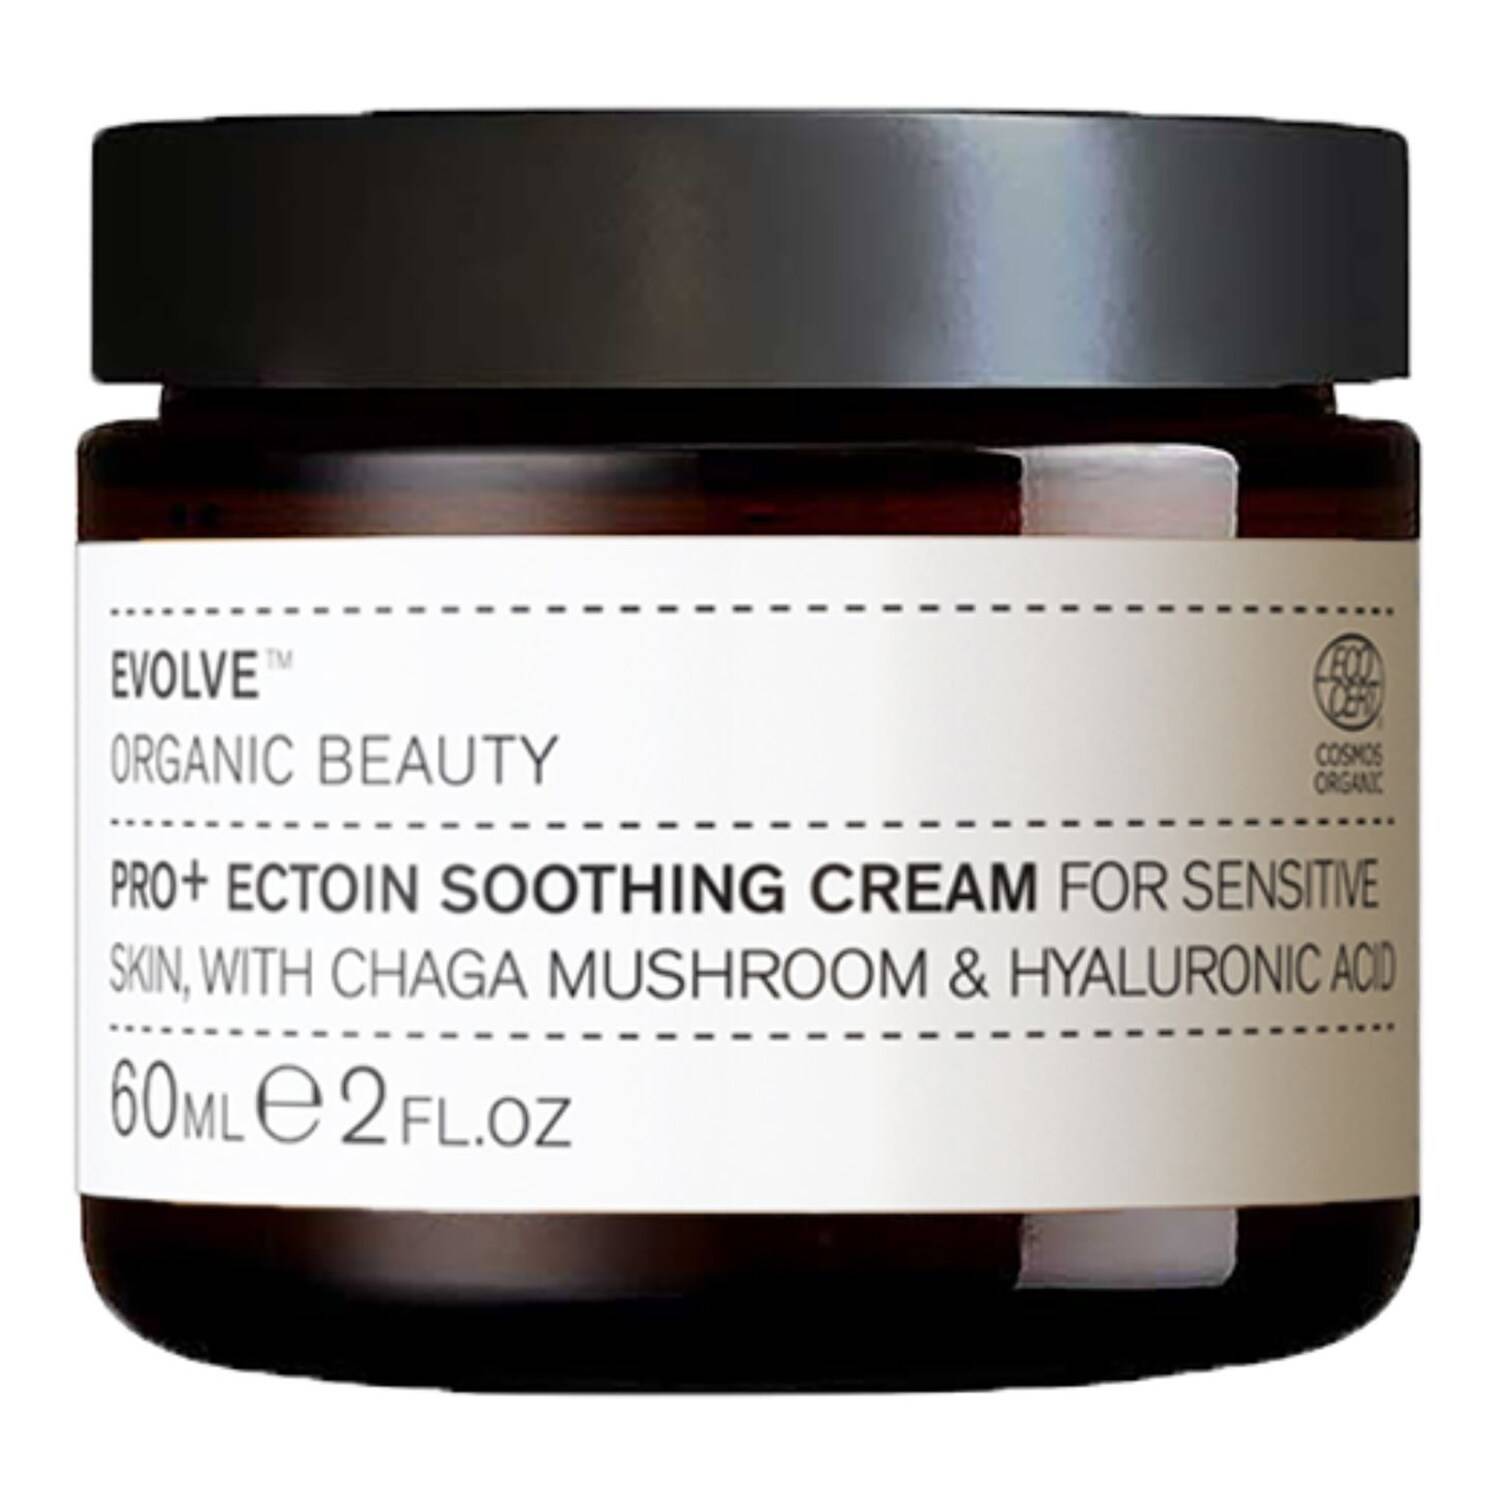 Evolve Pro + Ectoin Soothing Cream 60Ml